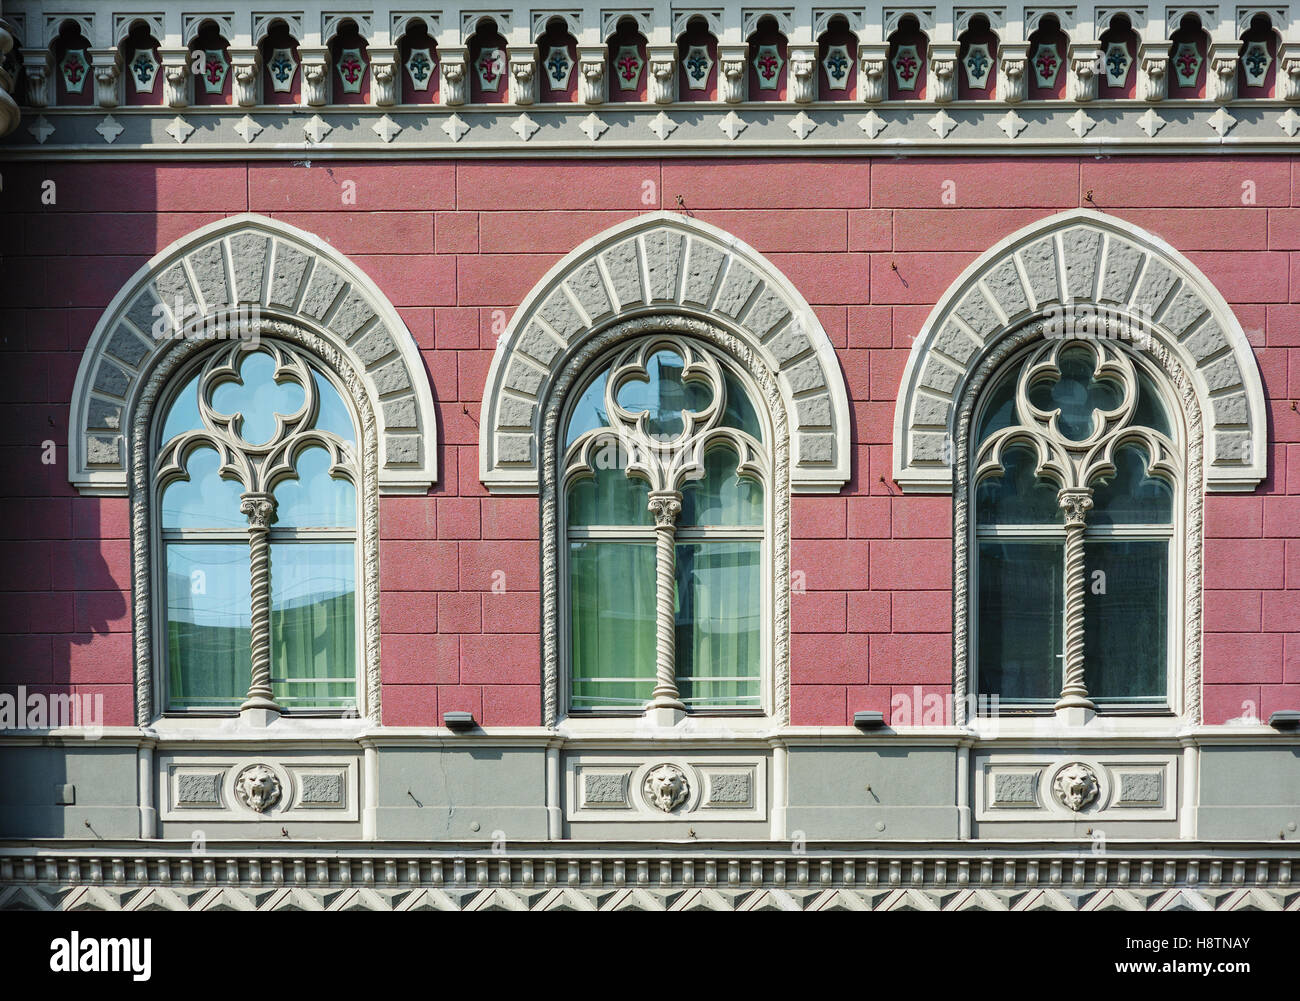 three Windows with arches in old architectural building Stock Photo